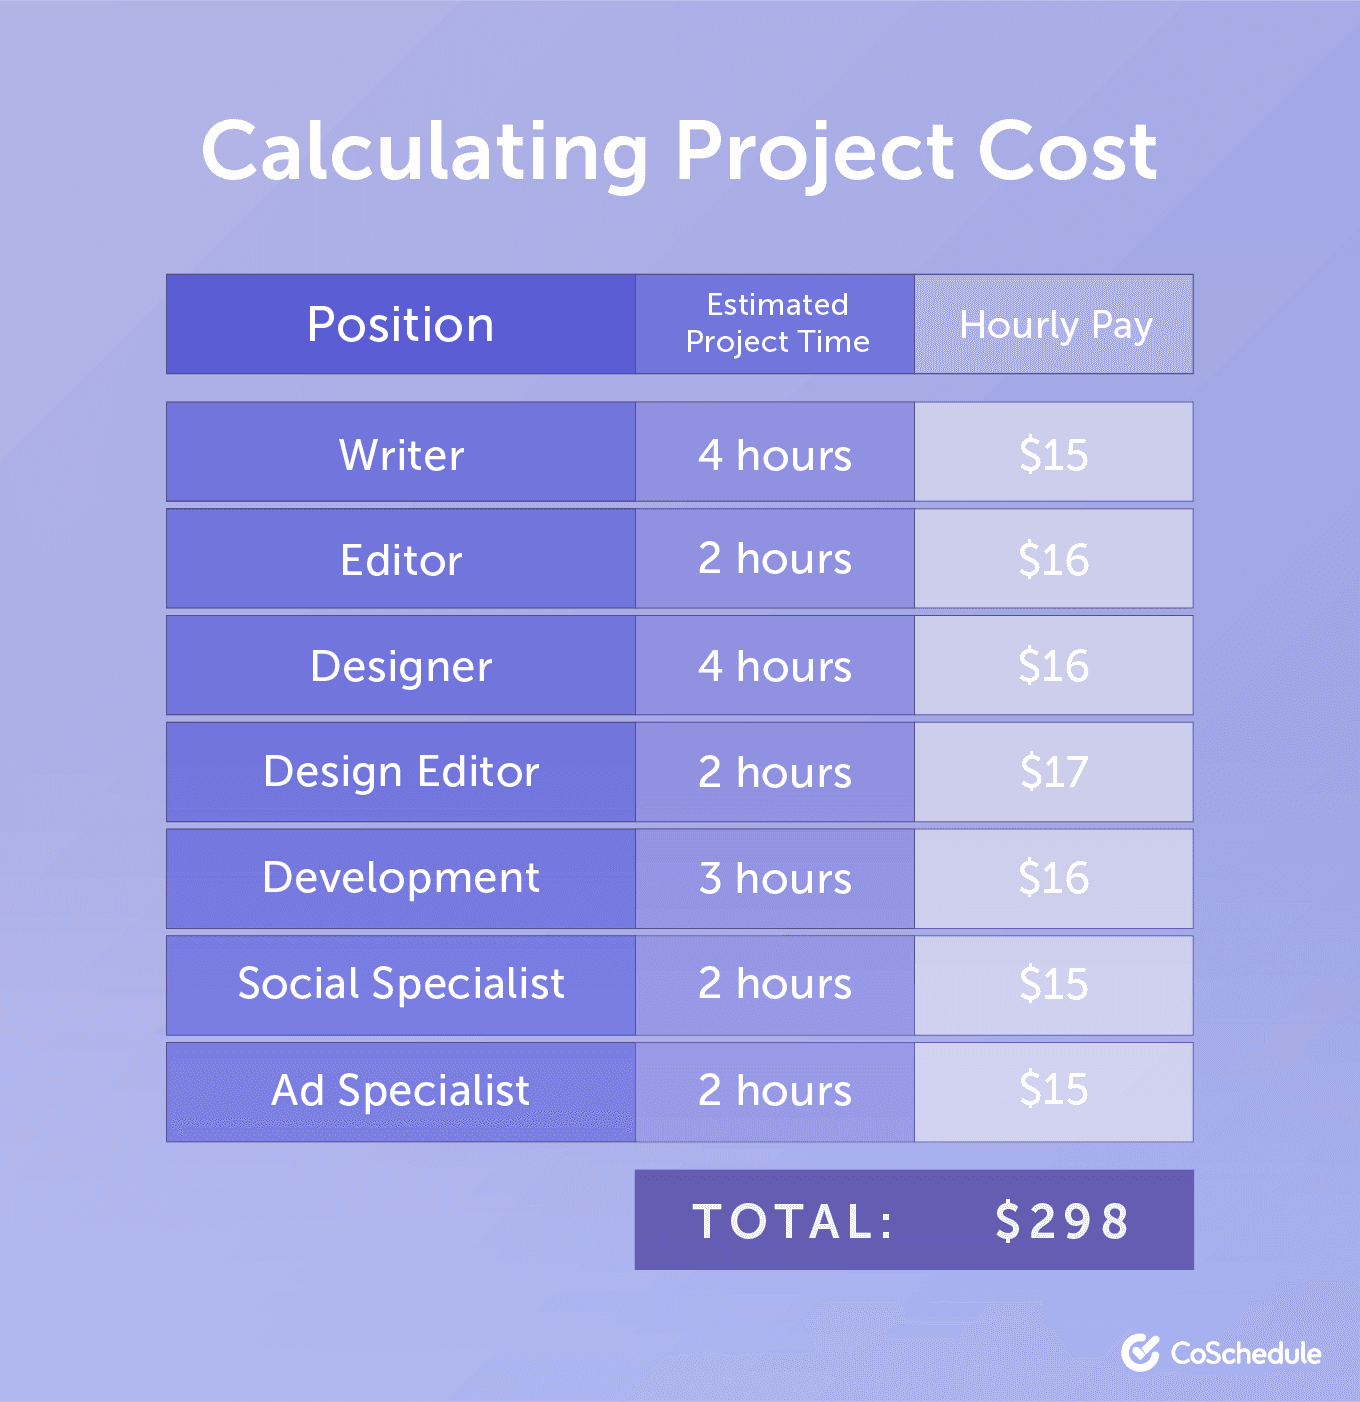 Calculating project cost